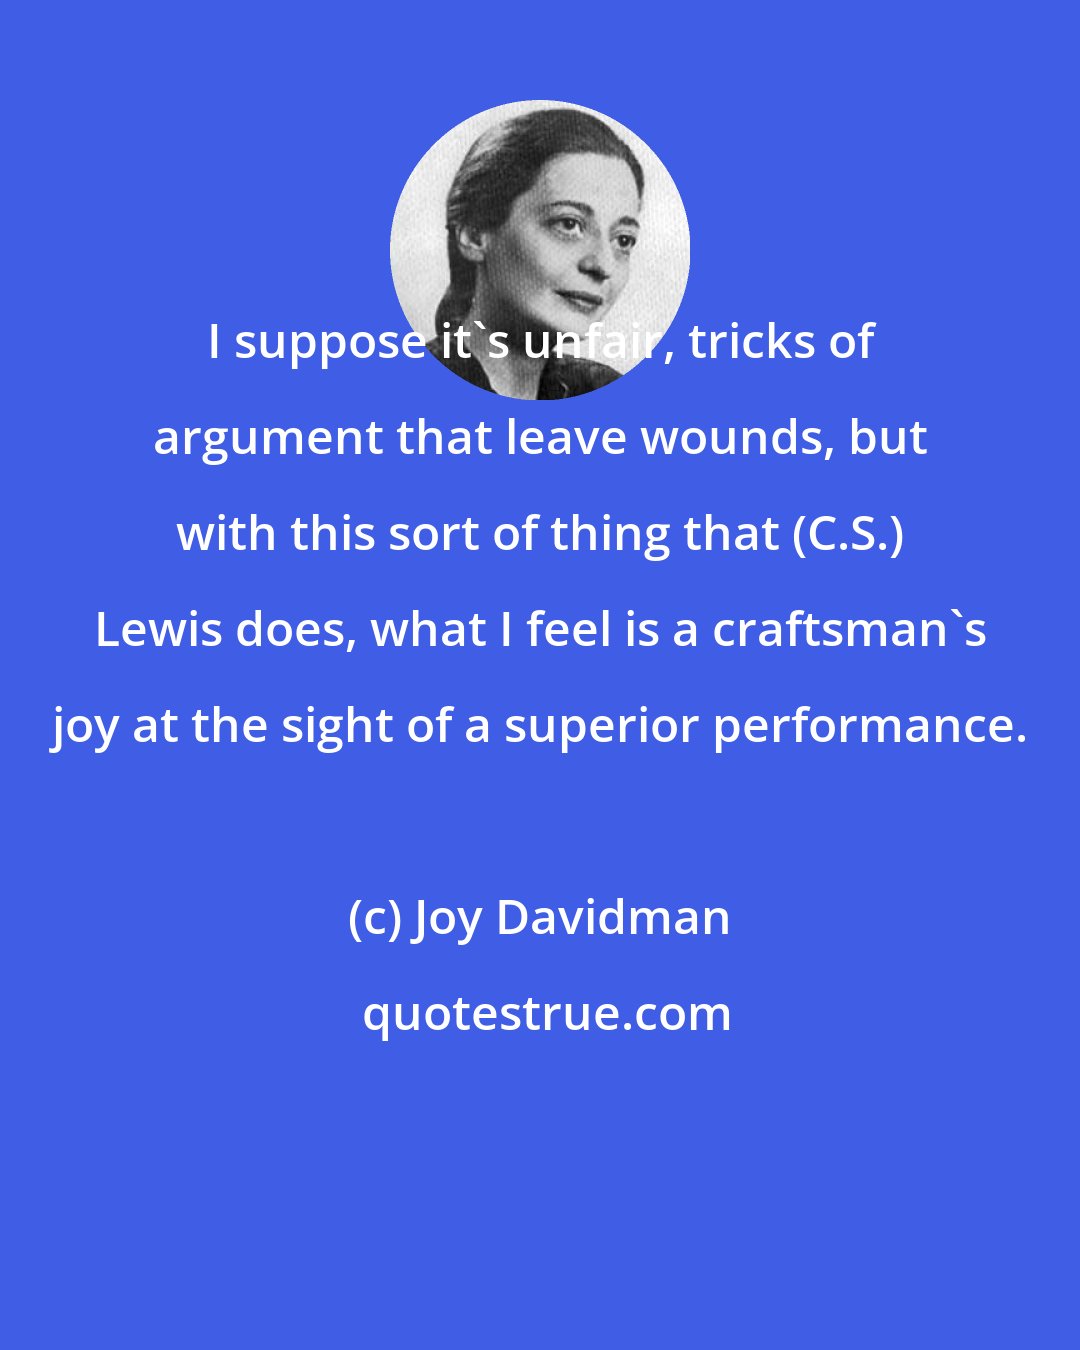 Joy Davidman: I suppose it's unfair, tricks of argument that leave wounds, but with this sort of thing that (C.S.) Lewis does, what I feel is a craftsman's joy at the sight of a superior performance.